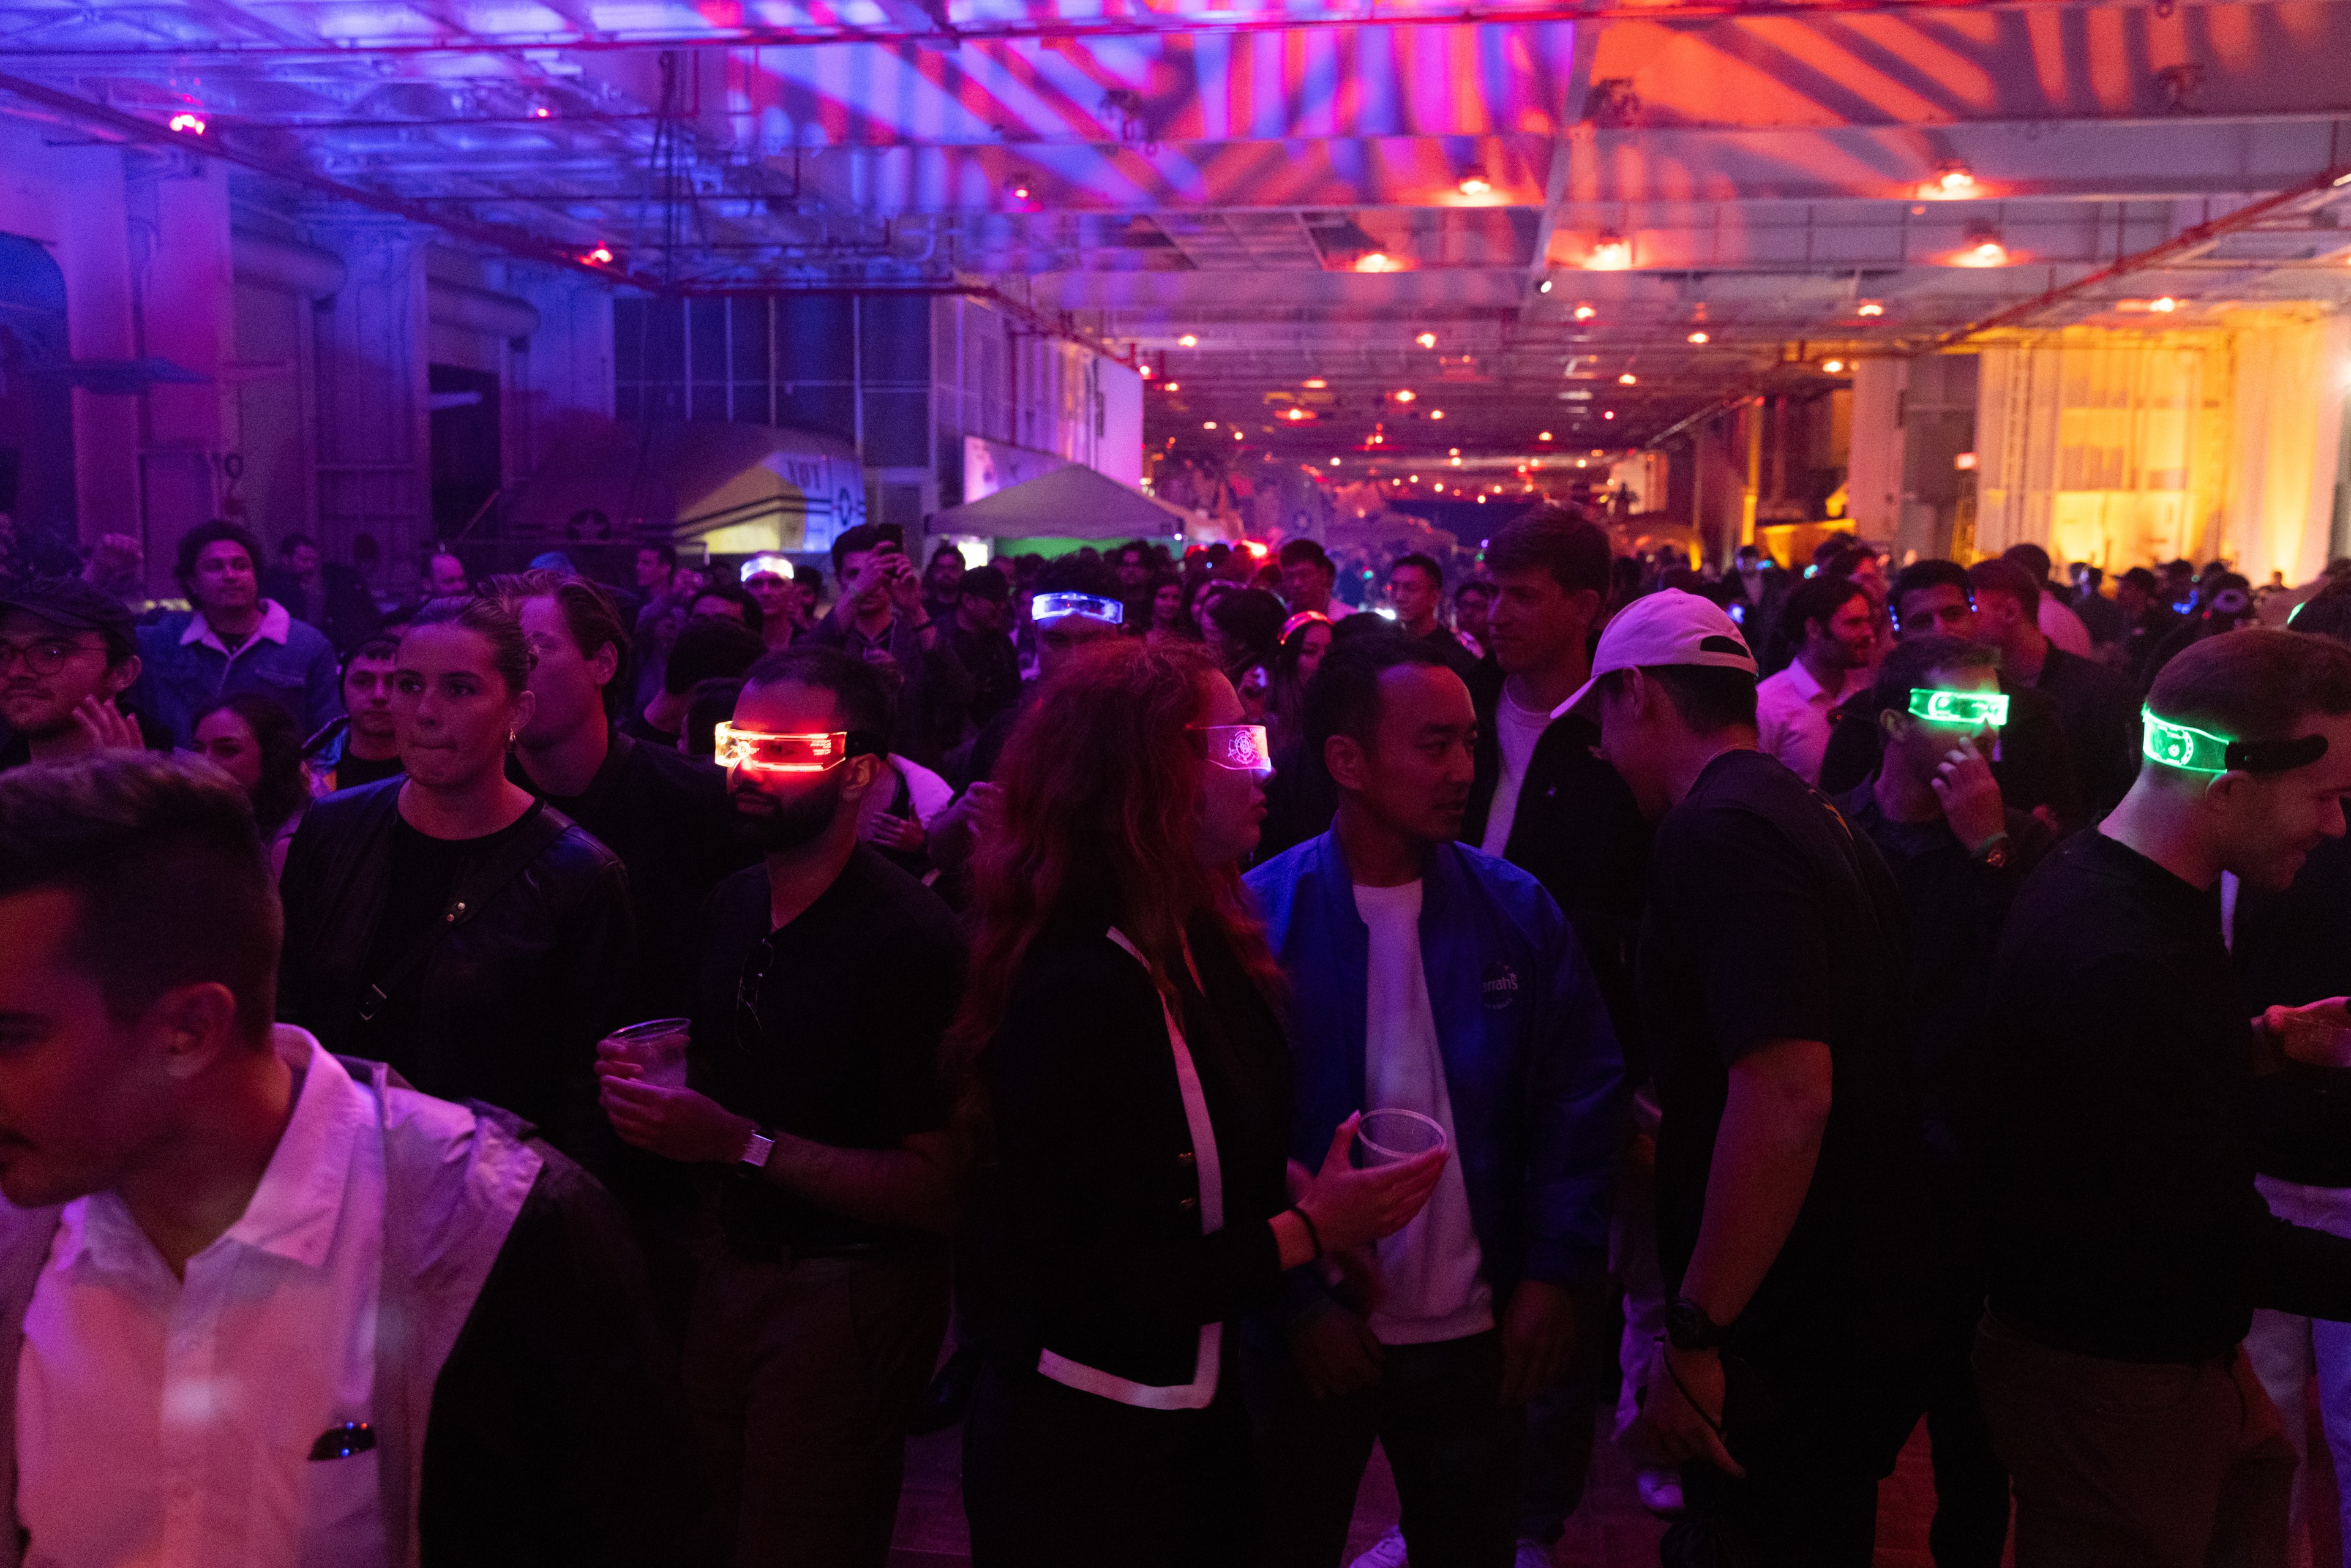 The image shows a crowded indoor event with people wearing colorful LED glasses amid vibrant purple and orange lighting. The setting has an energetic and festive atmosphere.